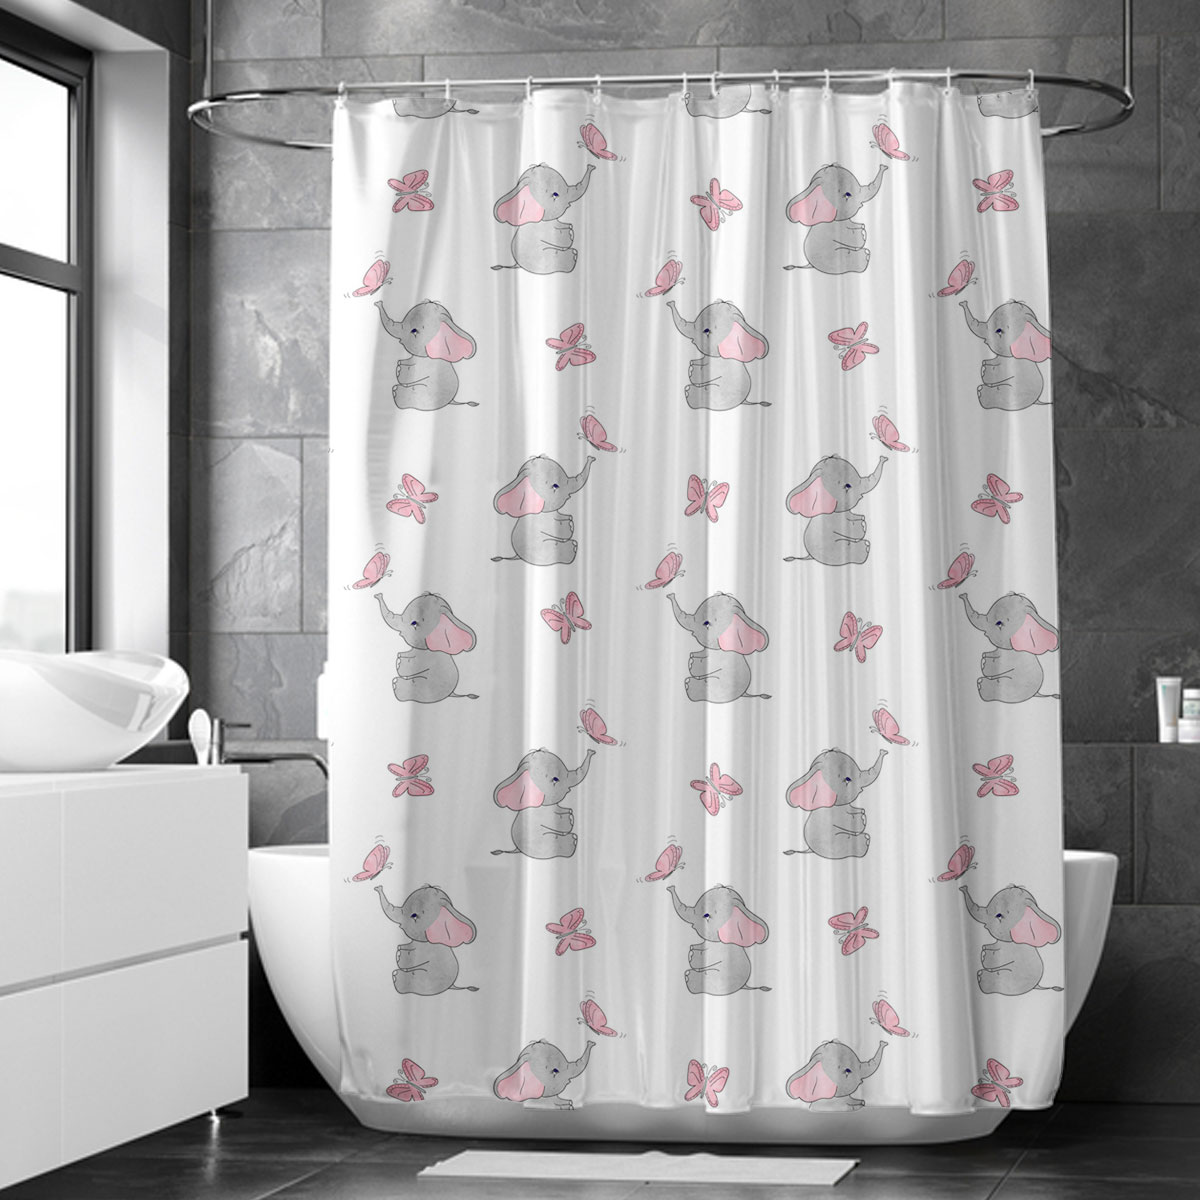 Playing African Elephant Shower Curtain 6